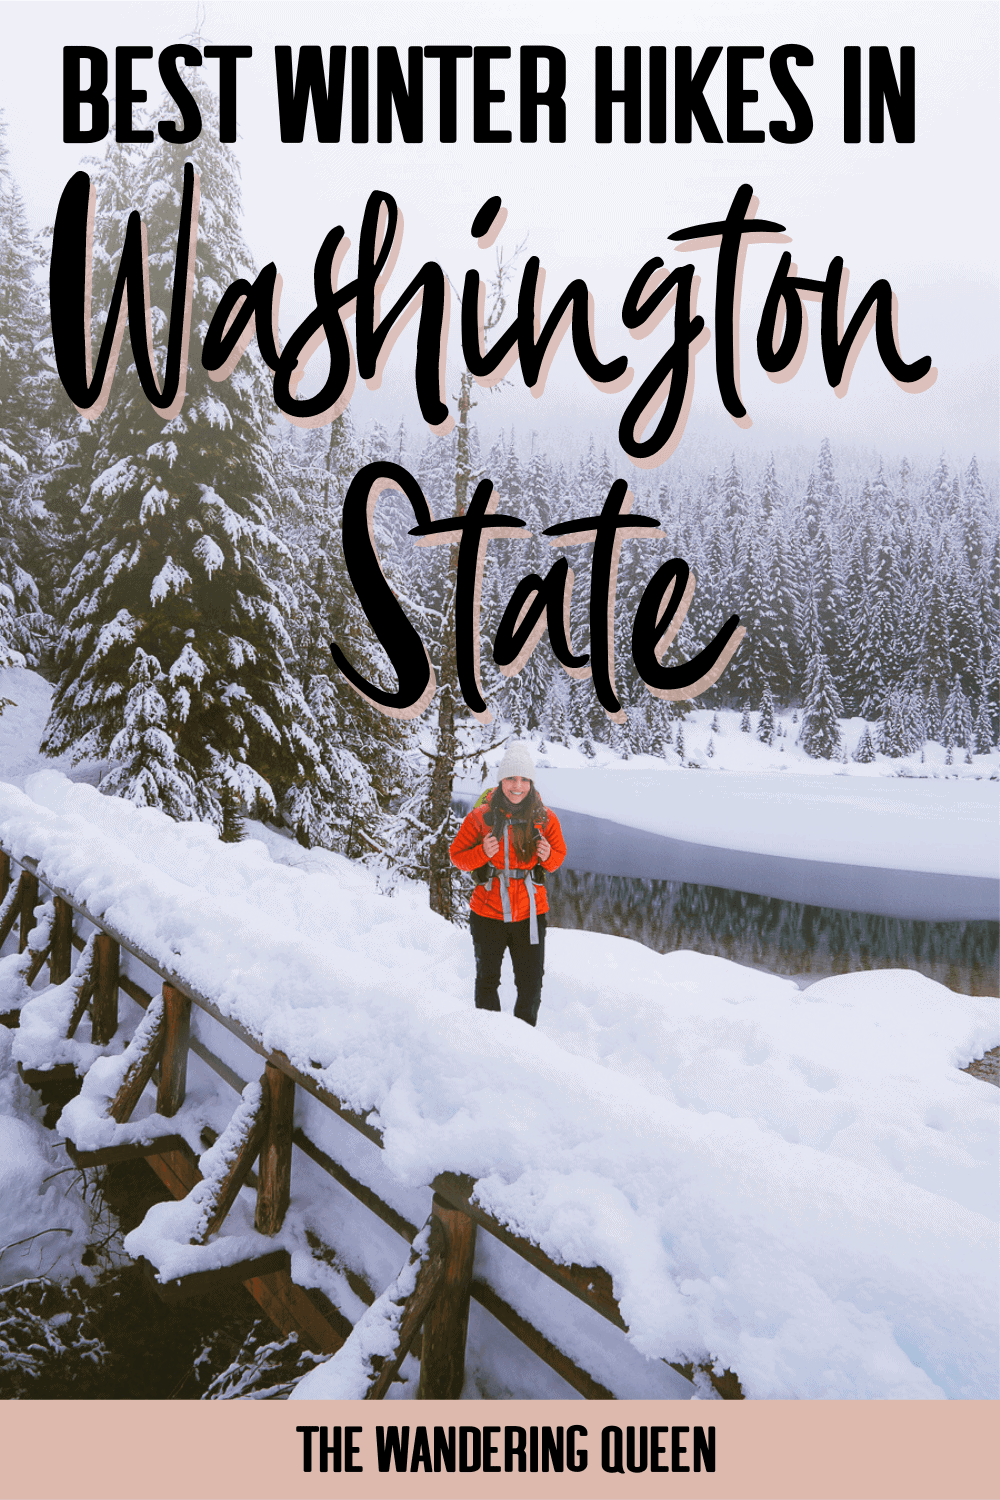 How to Stay Cozy When You Camp in Your Car — Washington Trails Association